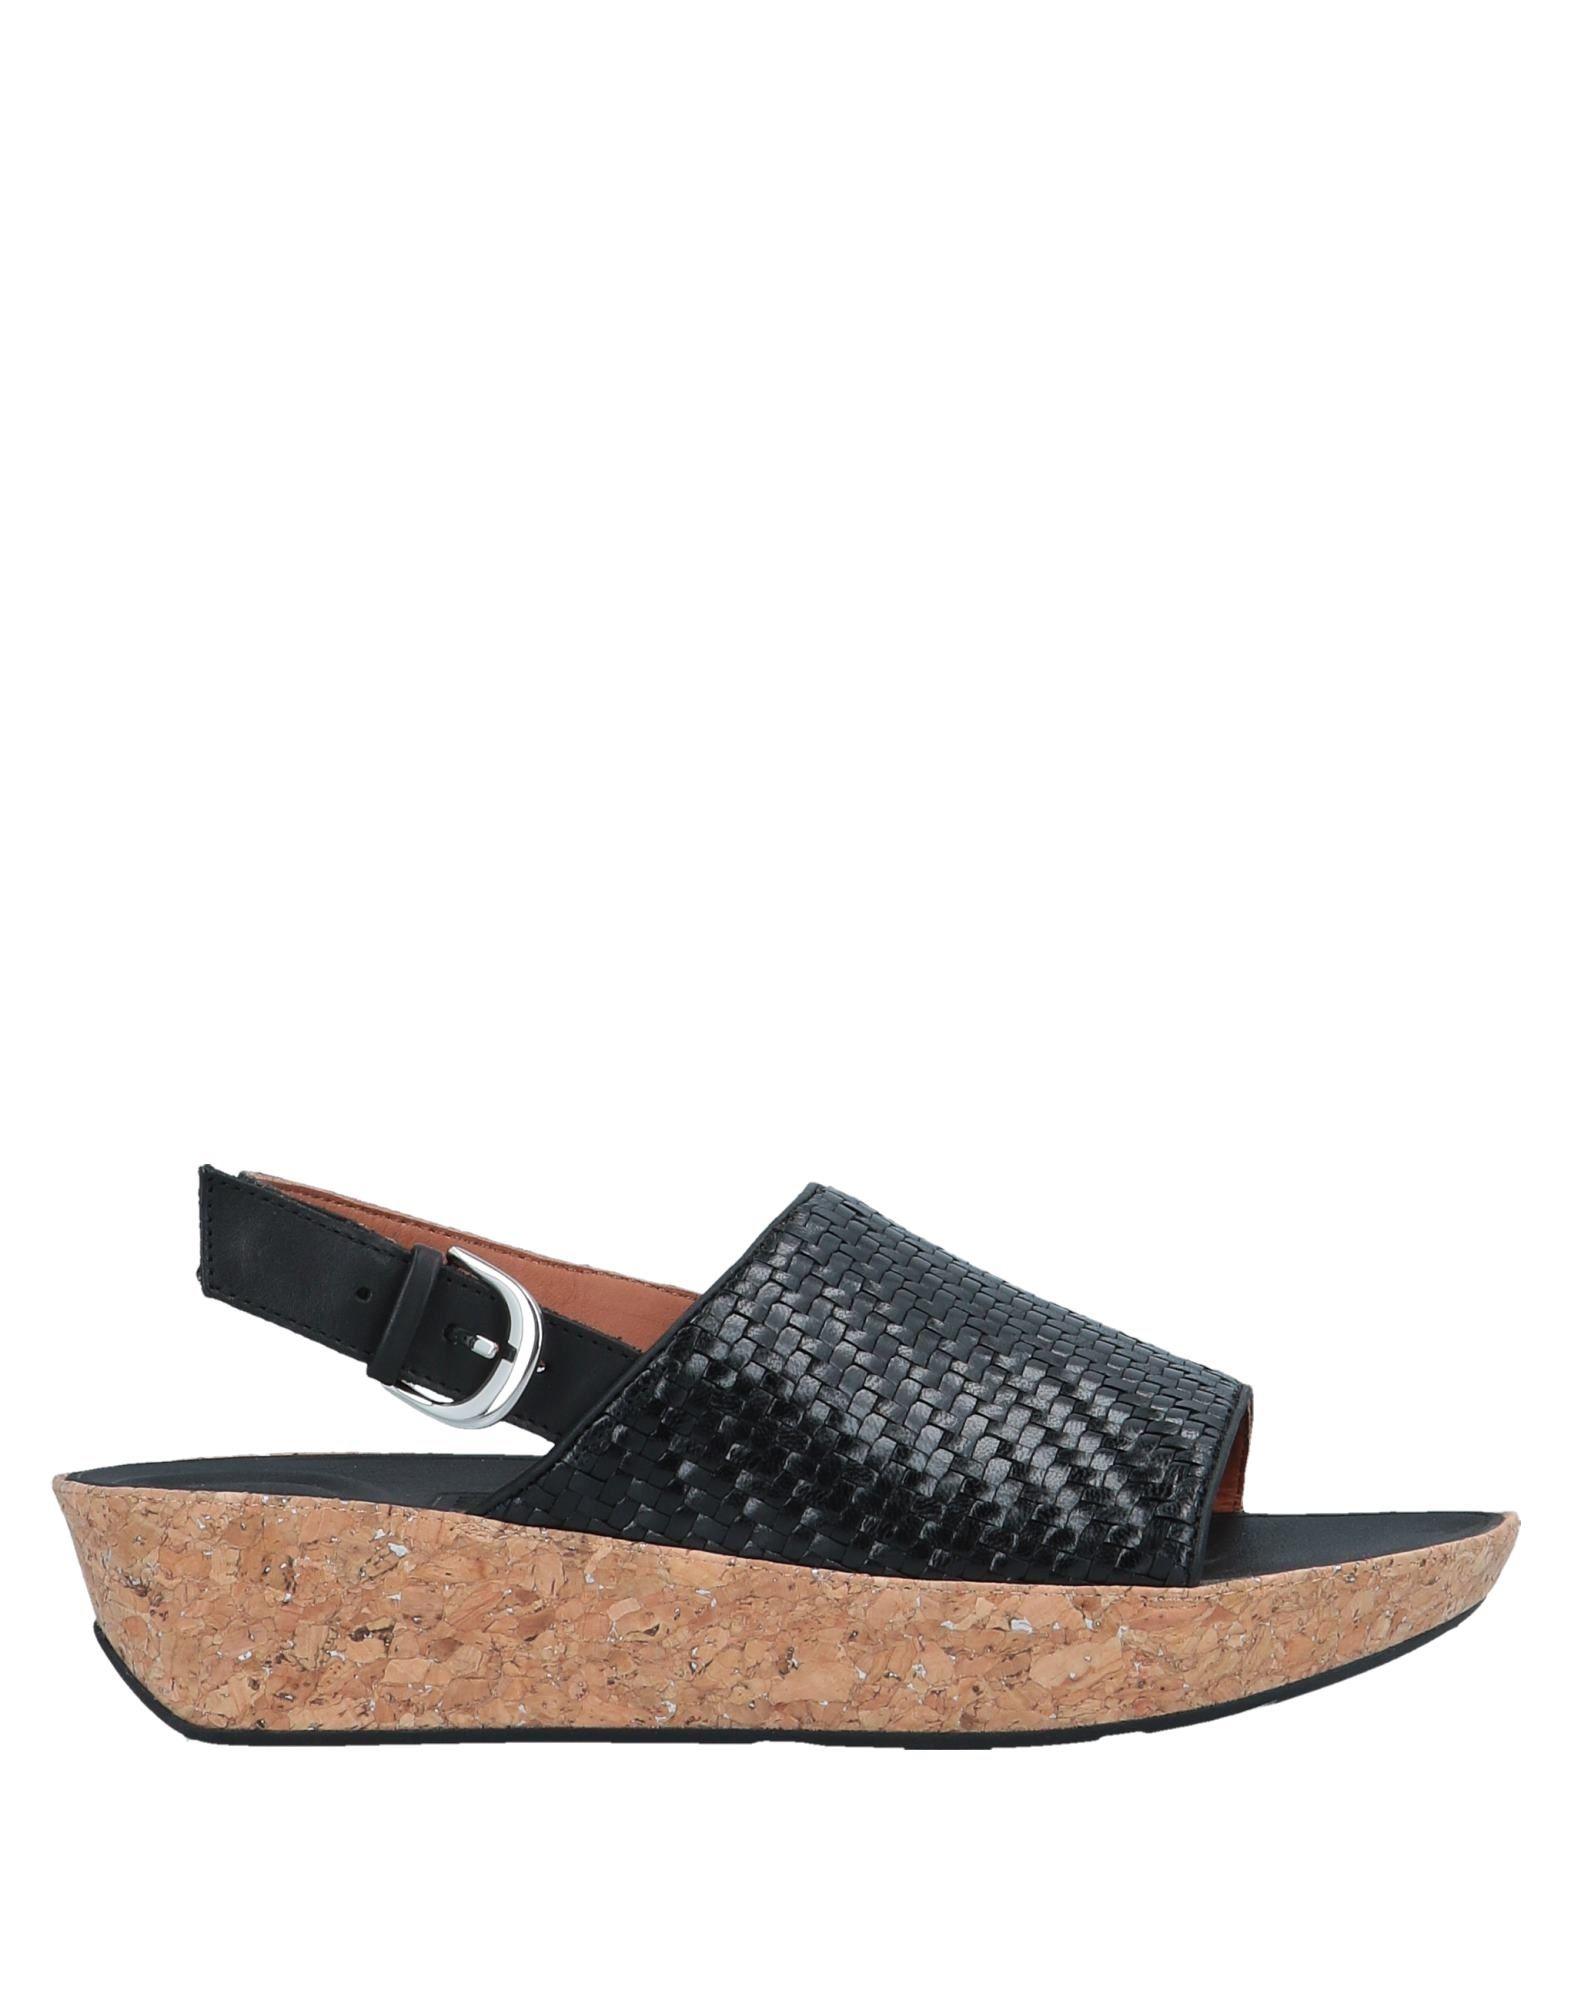 Fitflop Leather Sandals in Black - Lyst